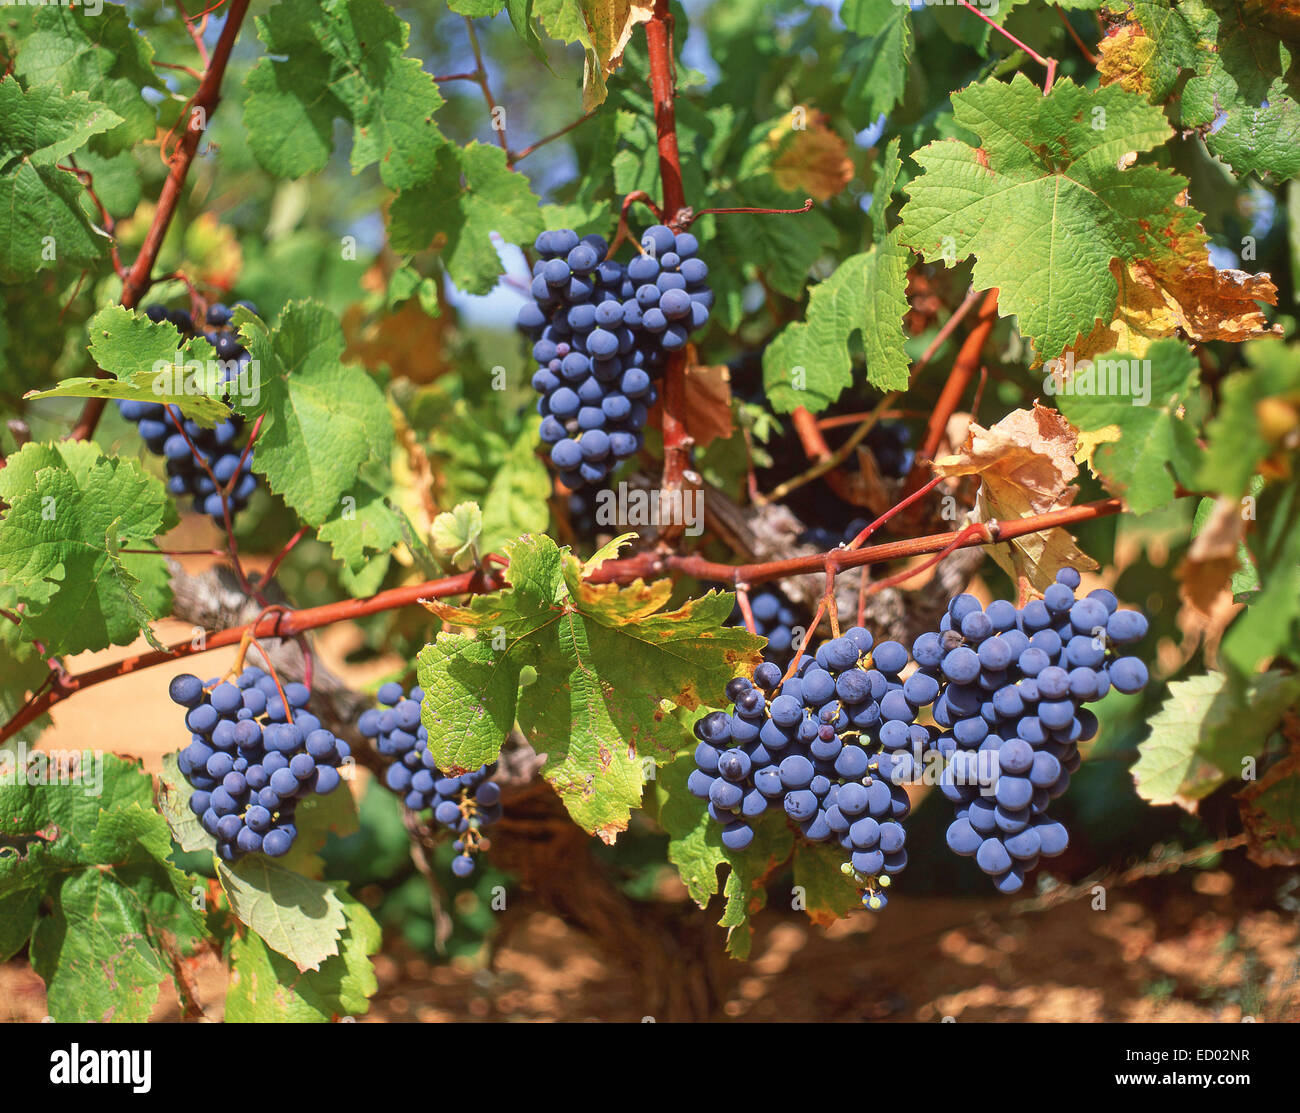 Red grapes on vines, Cala San Vincente, Ibiza, Balearic Islands, Spain Stock Photo